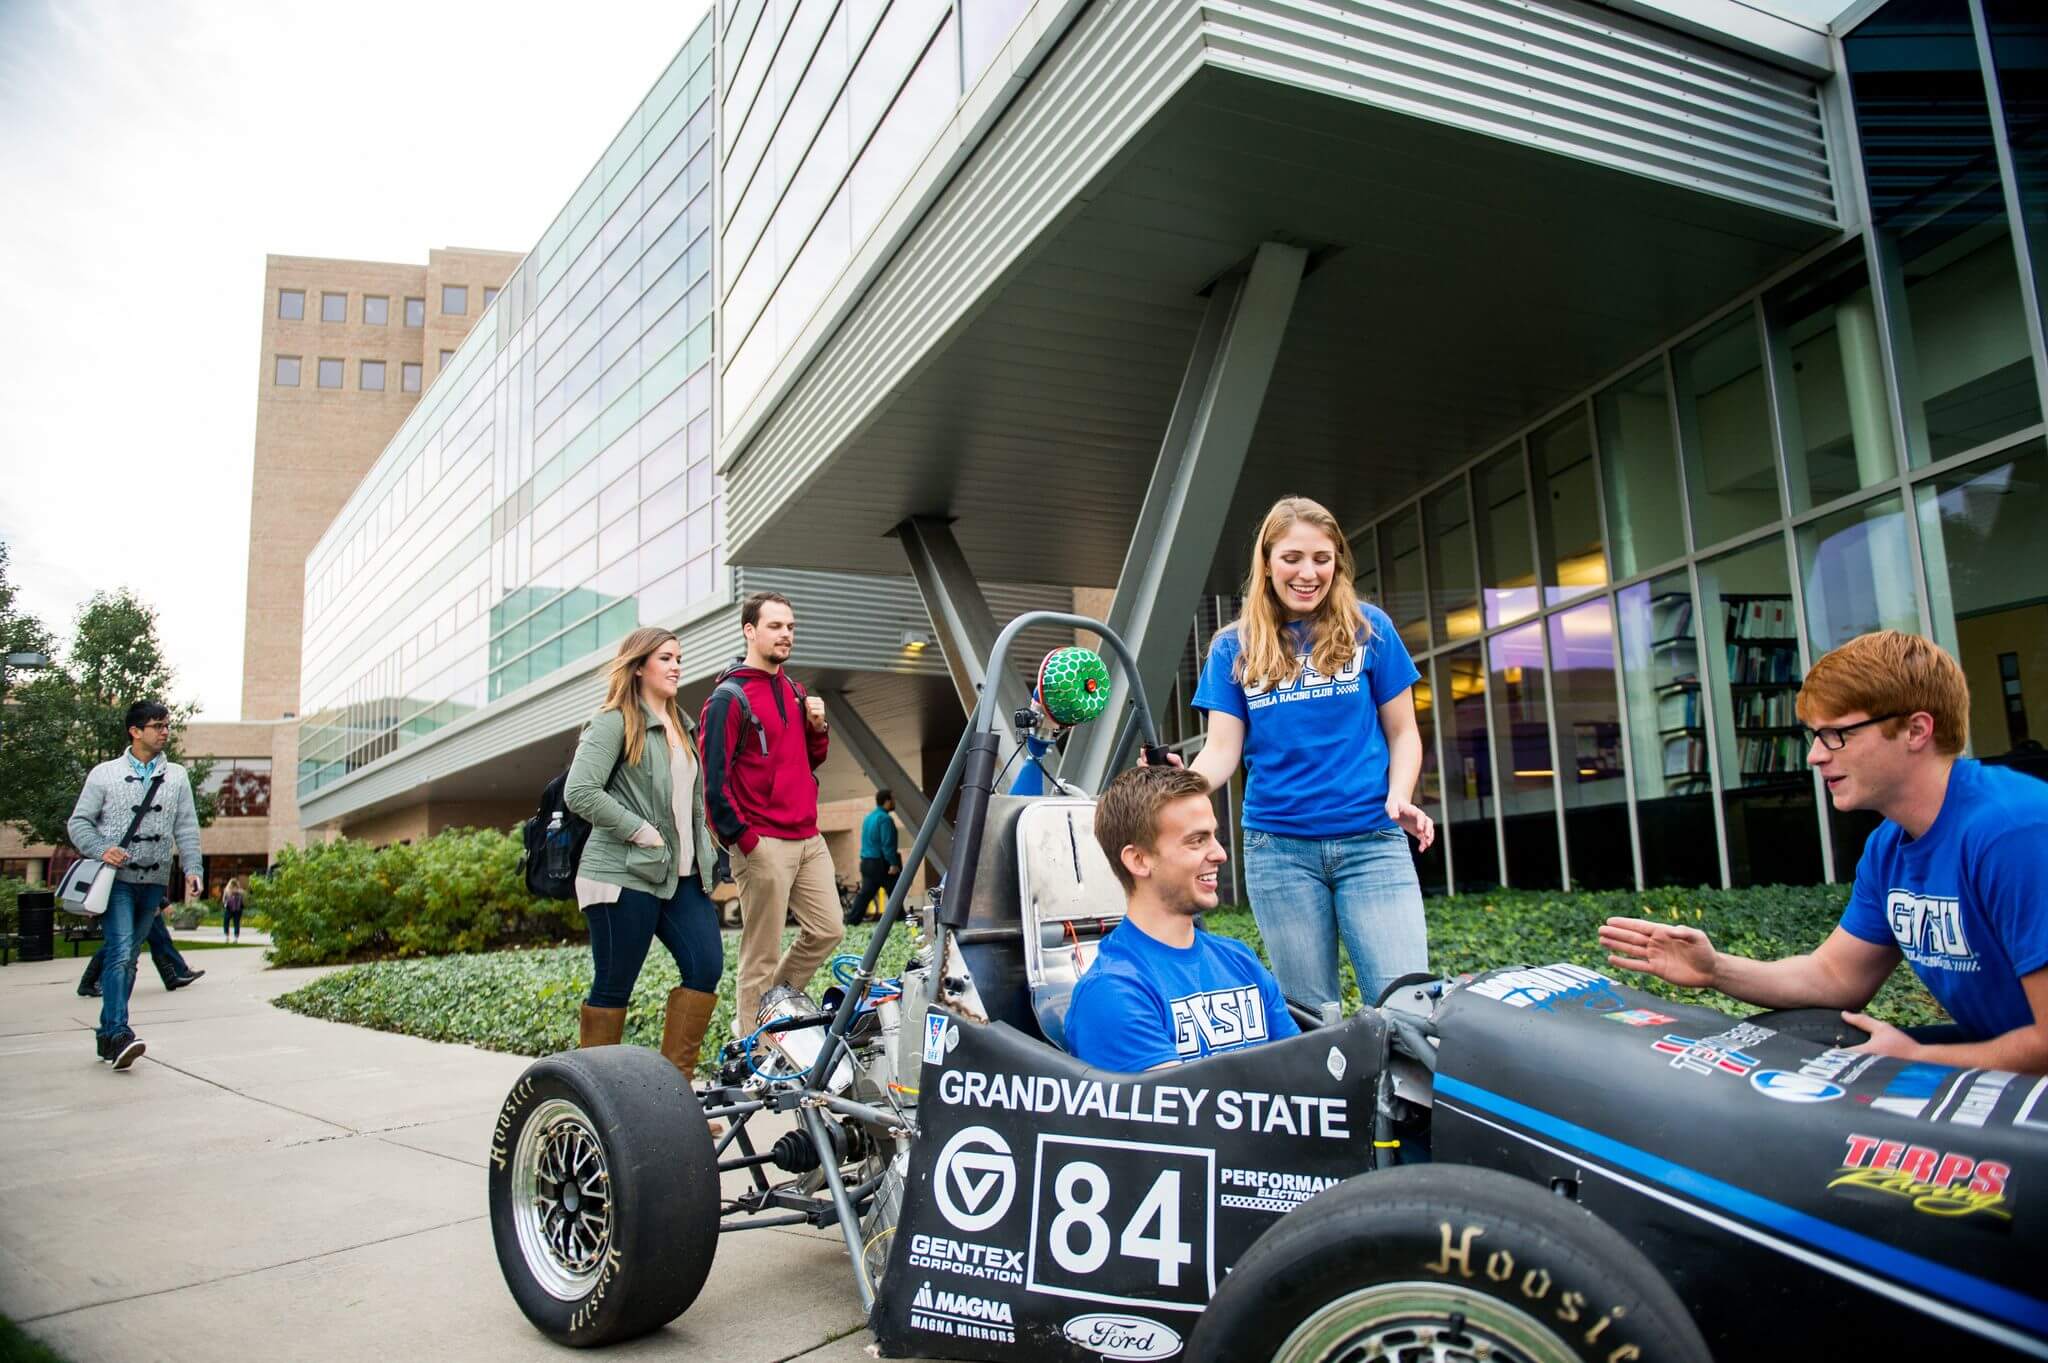 Grand Valley State University: Where tomorrow’s STEM experts are made